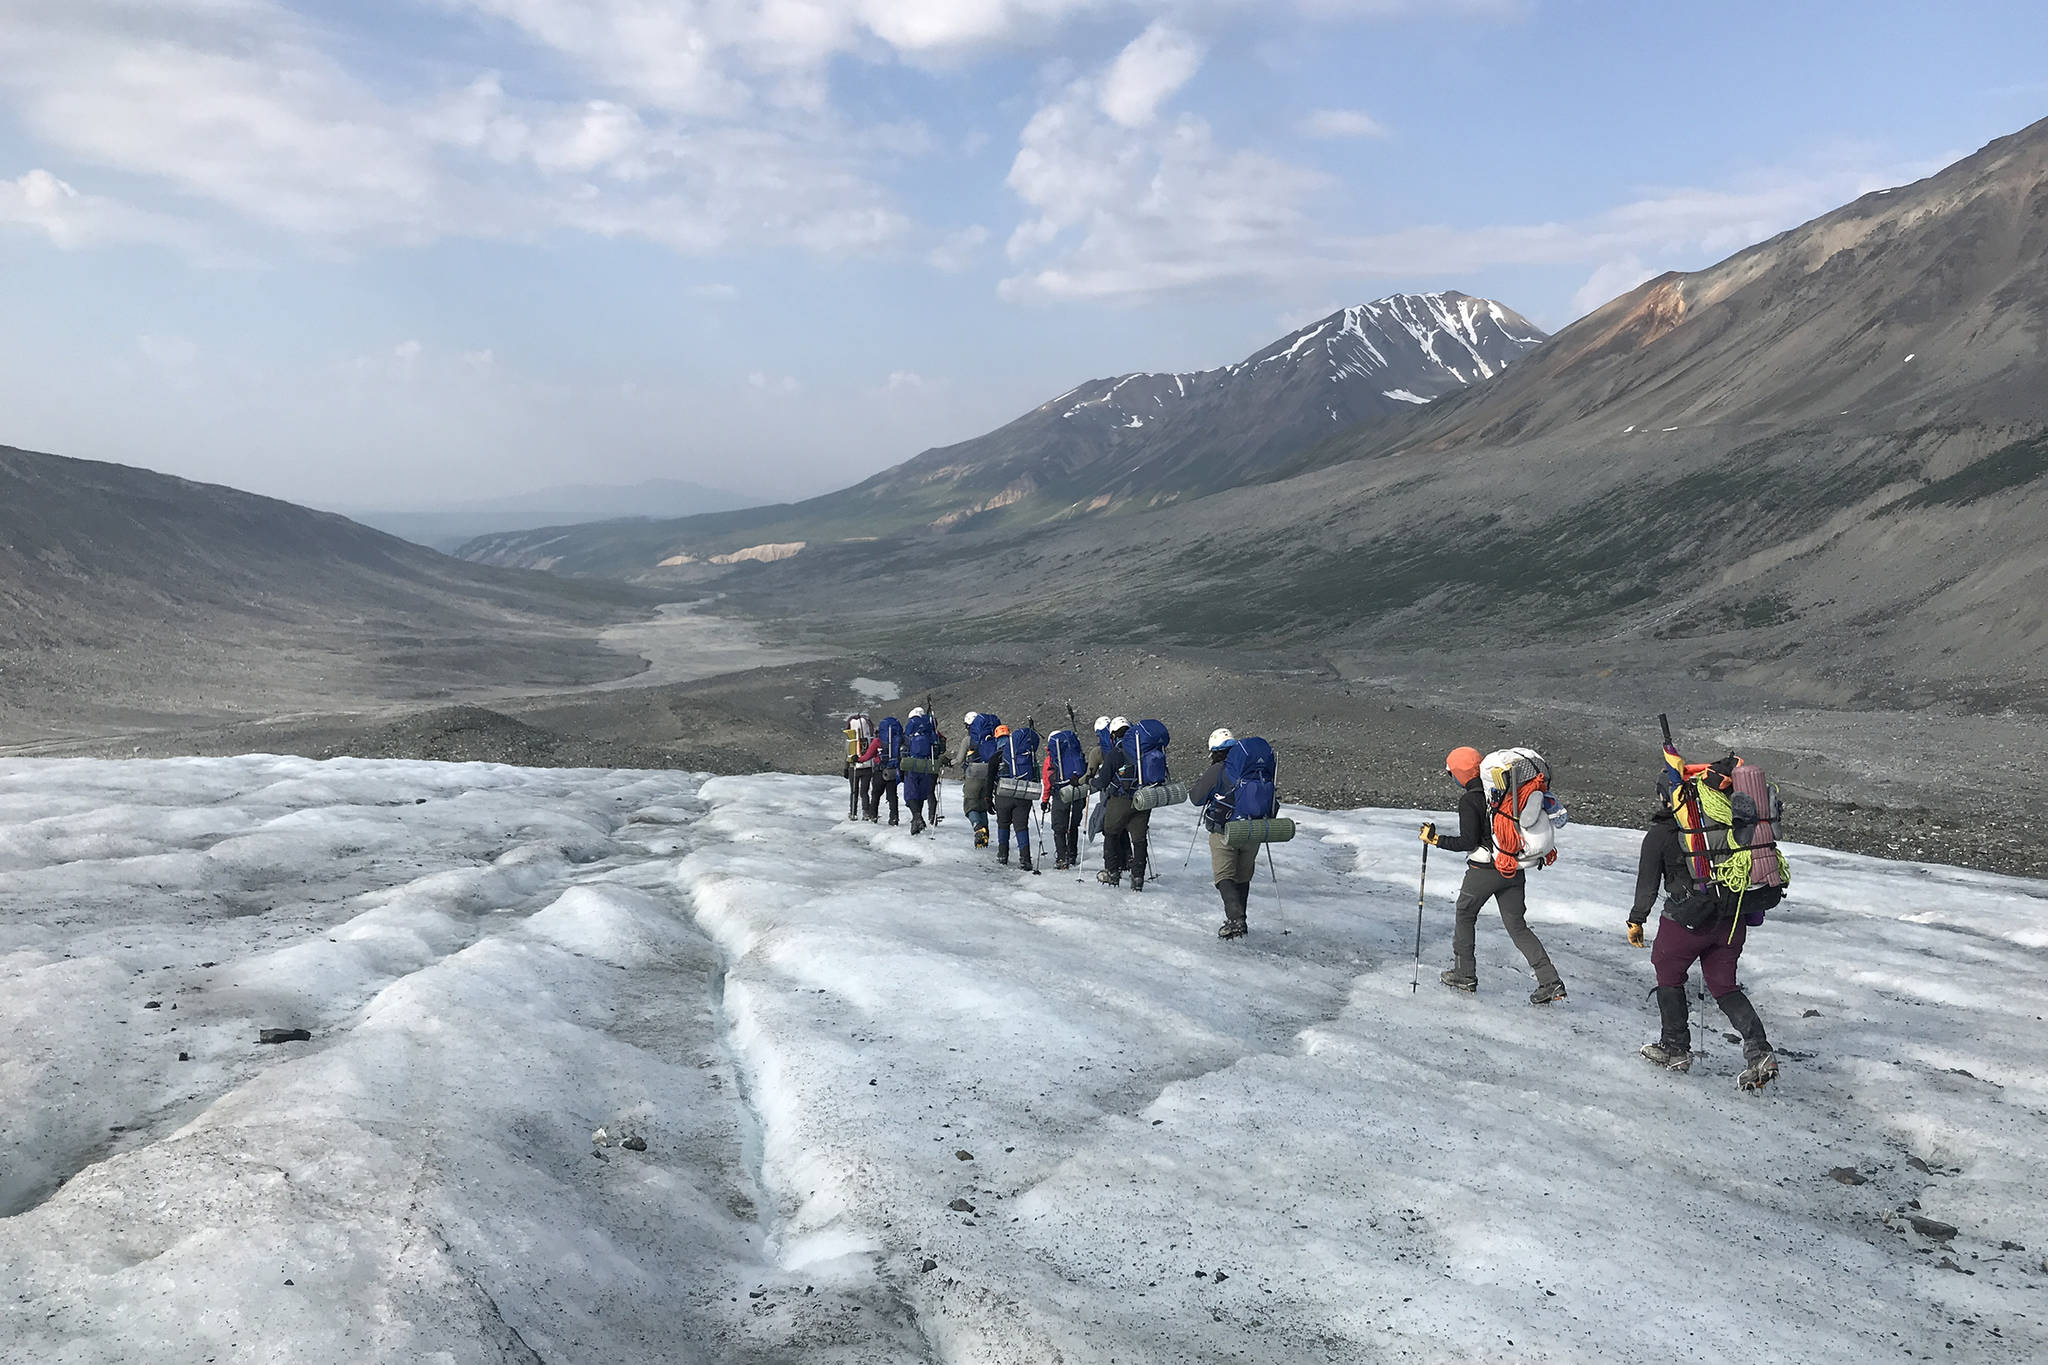 The 2019 Girls on Ice Alaska team travels down Gulkana Glacier at the end of their expedition. The group is currently accepting applications for three expeditions planned for this summer. (Courtesy Photo / Erin Cutts, Inspiring Girls Expeditions)